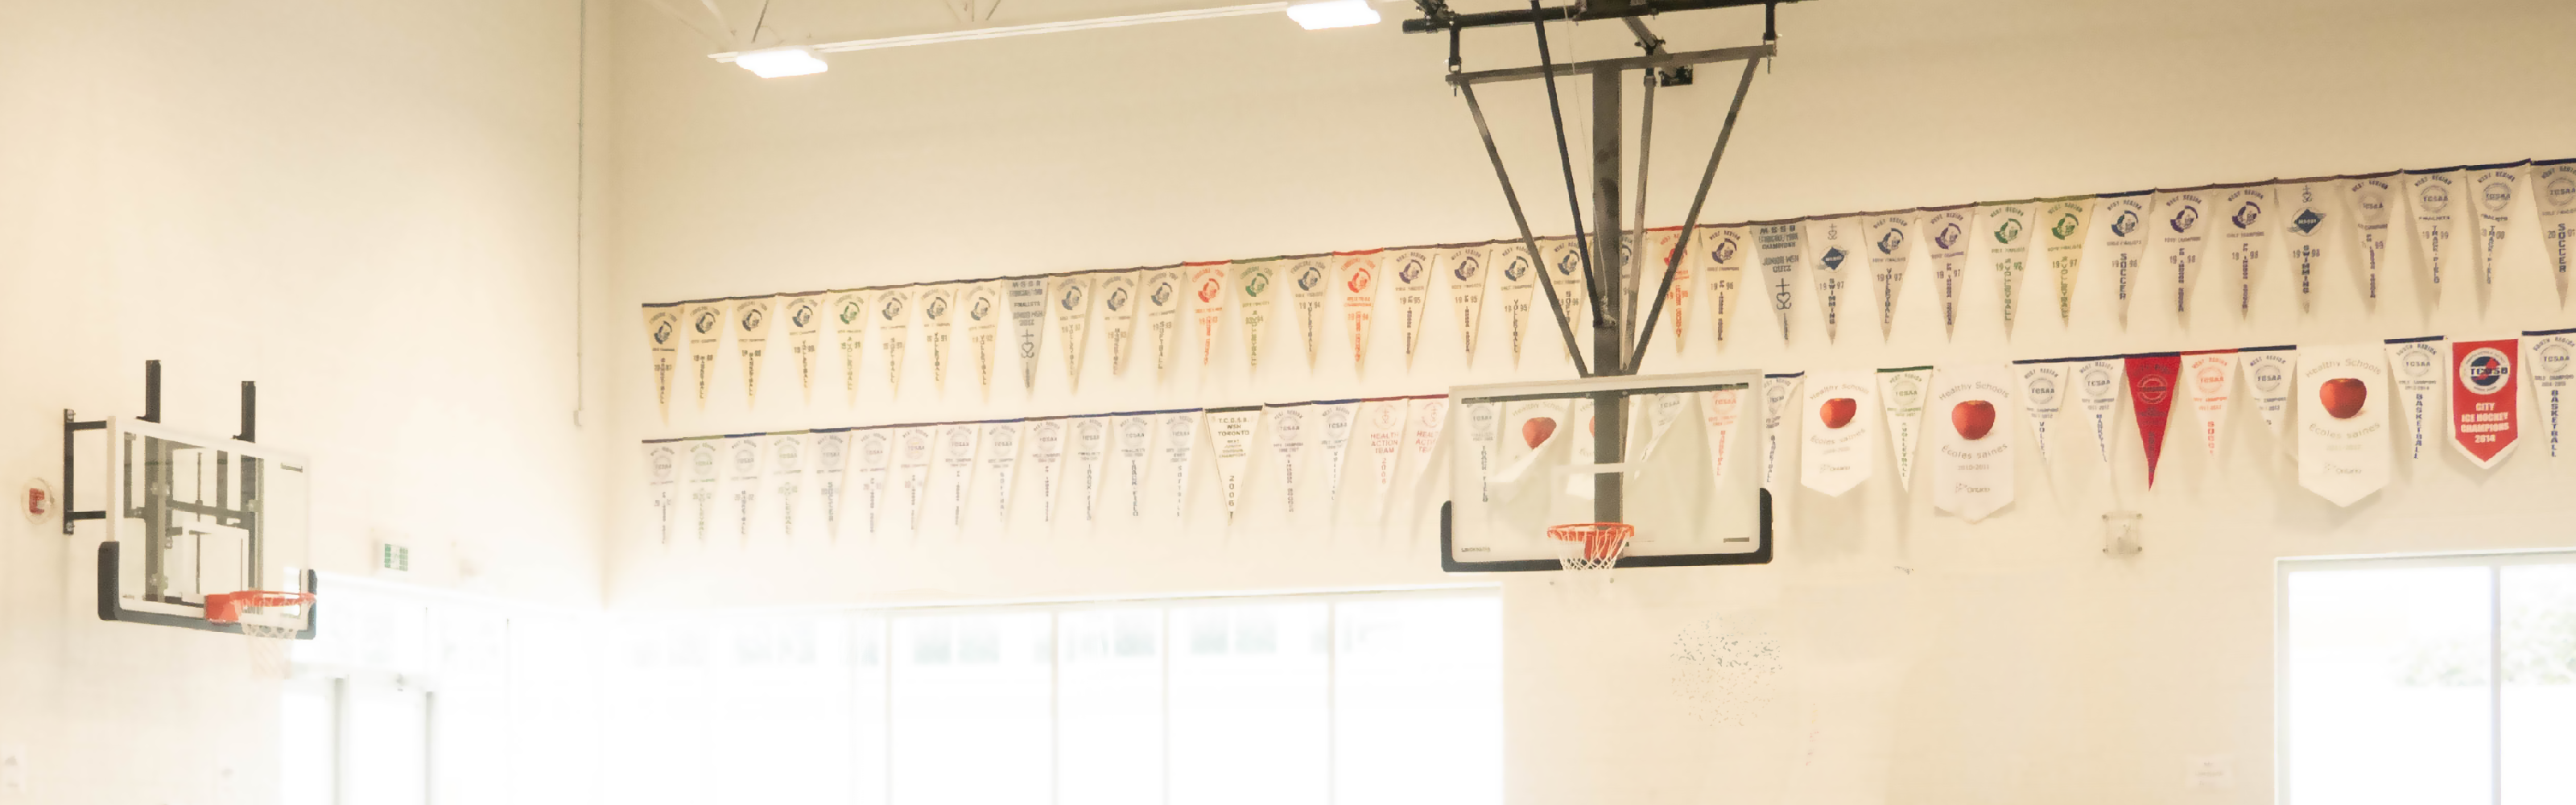 School gym with championship banners hung on the walls